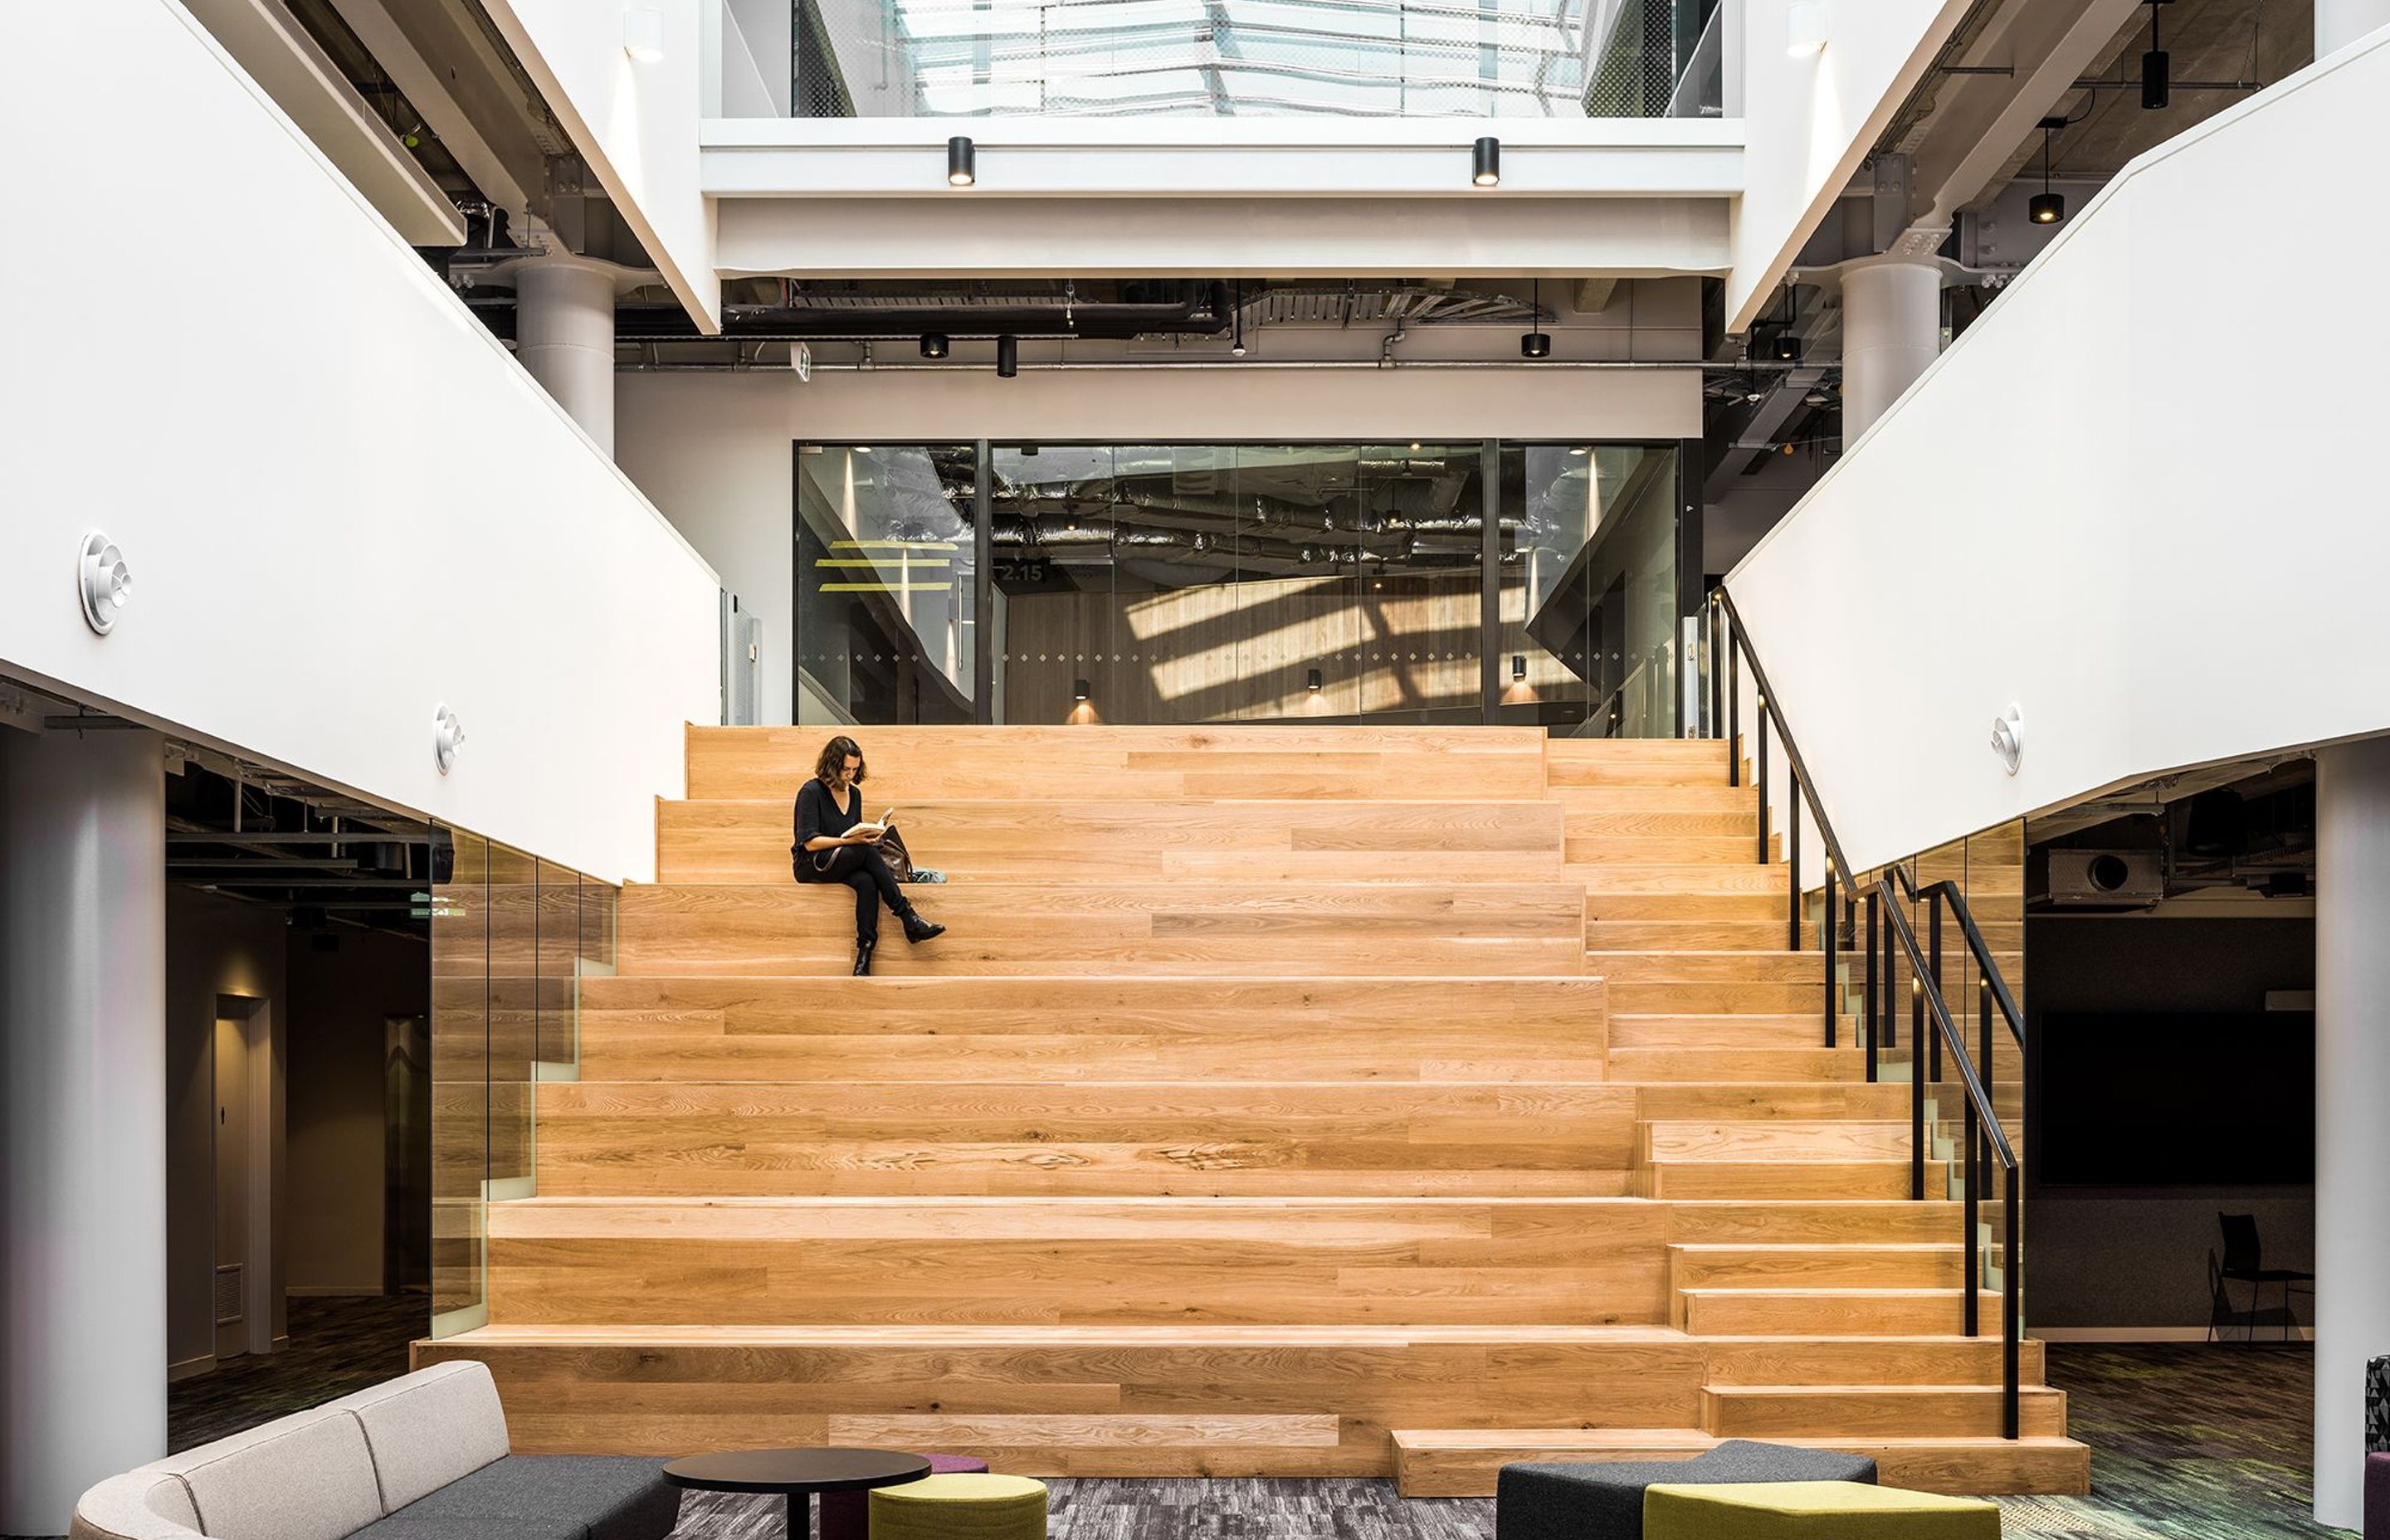 In Spark's offices, timber stairs work perfectly for talks, small-scale company gatherings and informal break-out spaces